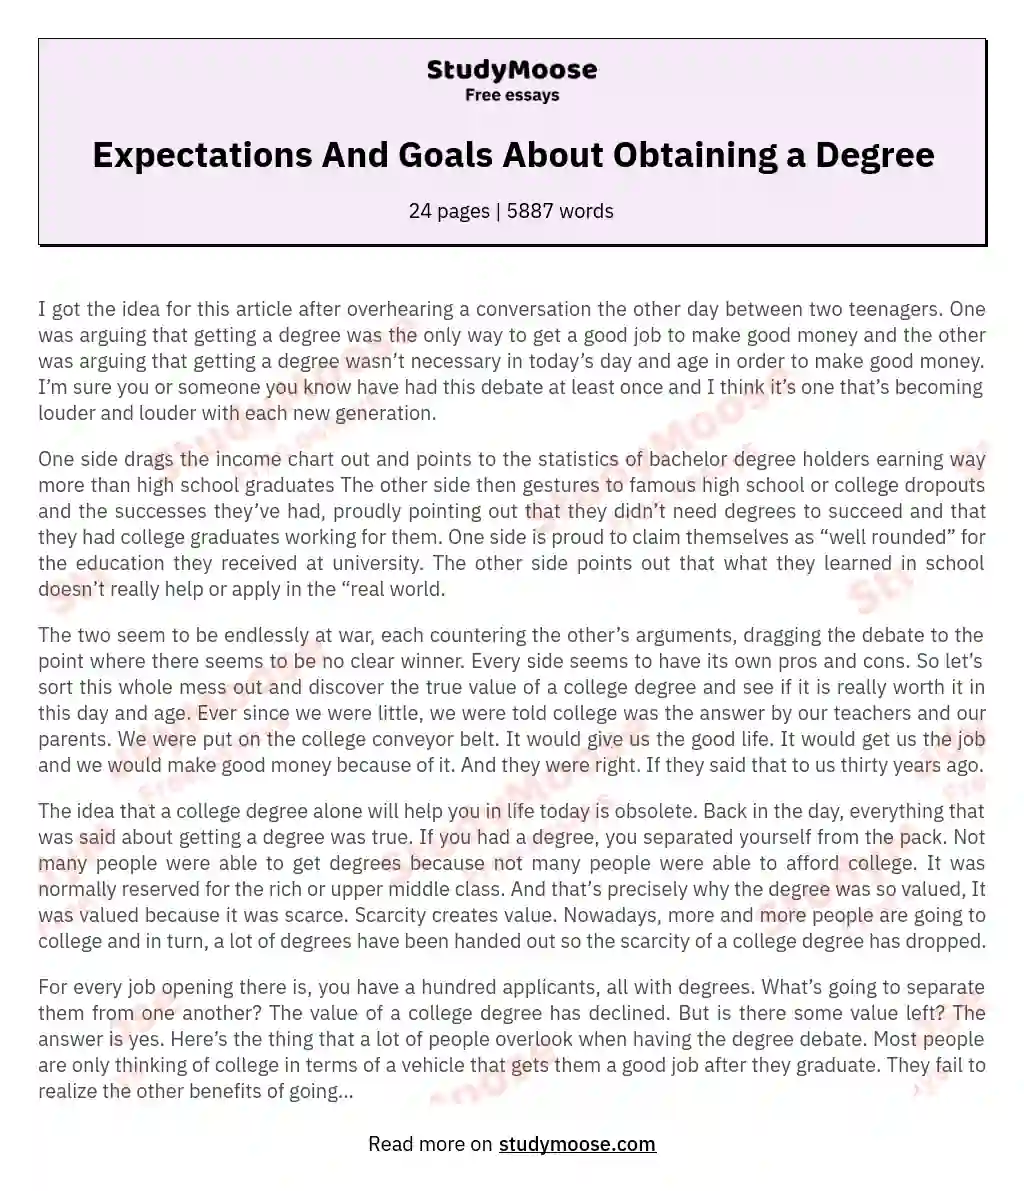 Expectations And Goals About Obtaining a Degree essay